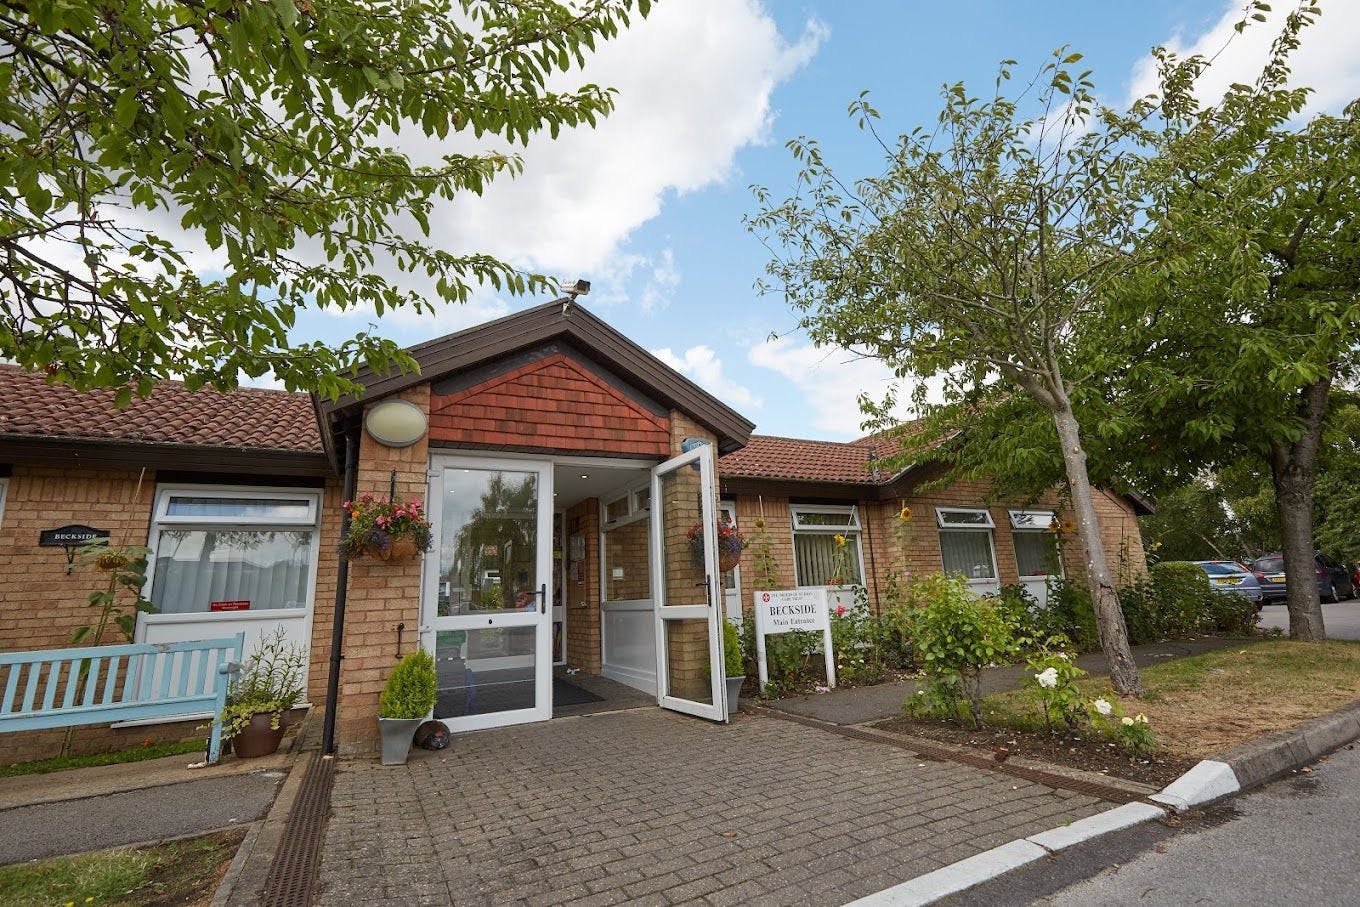 Exterior of Beckside Care Home in North Hykeham, Lincolnshire